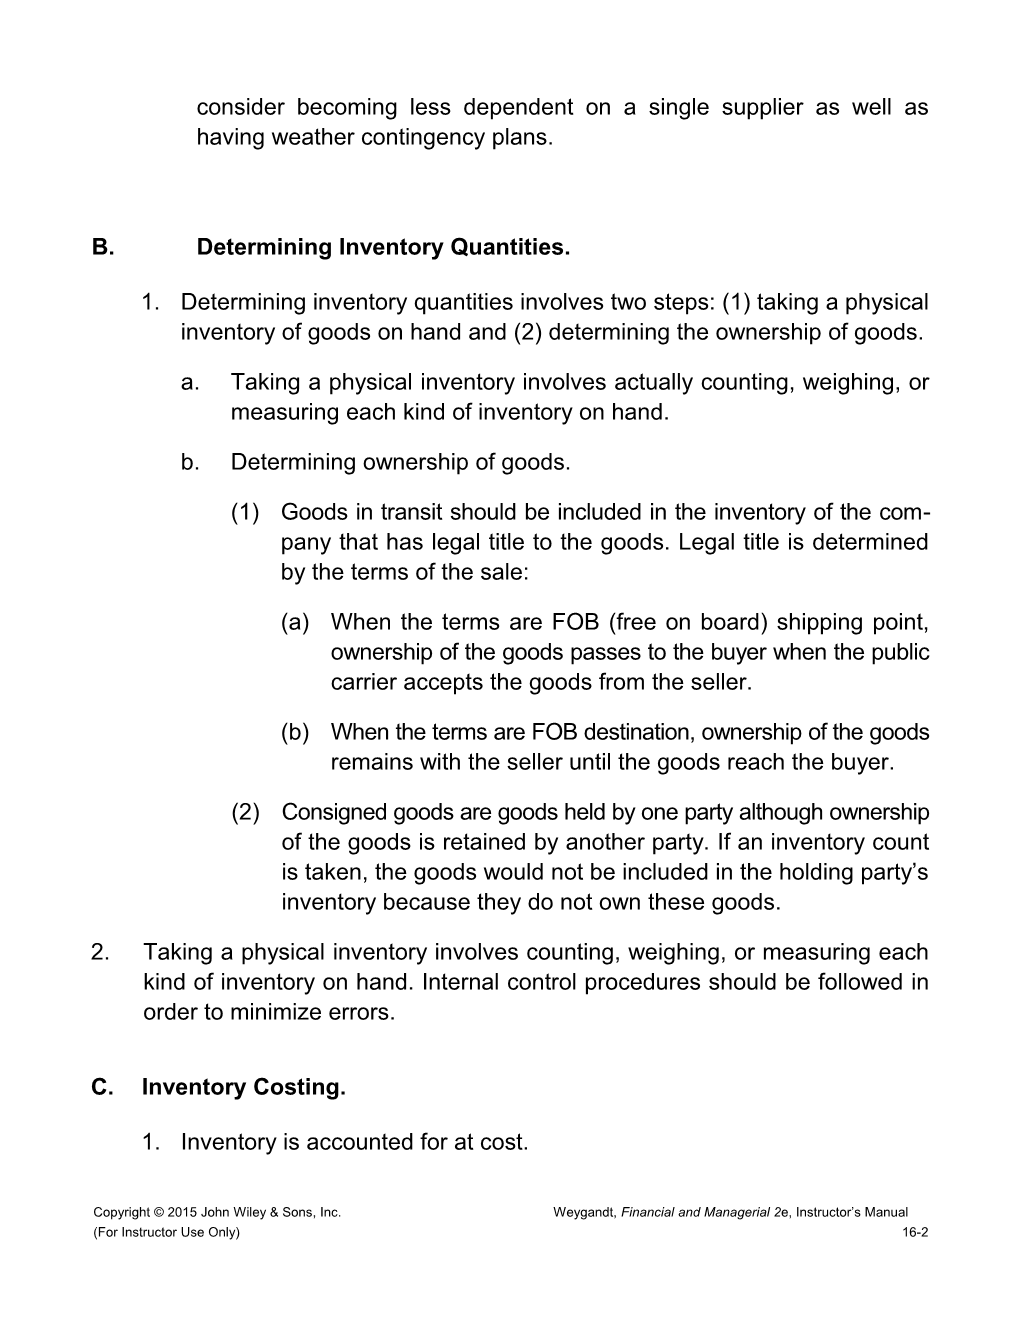 A.Classifying and Determining Inventory